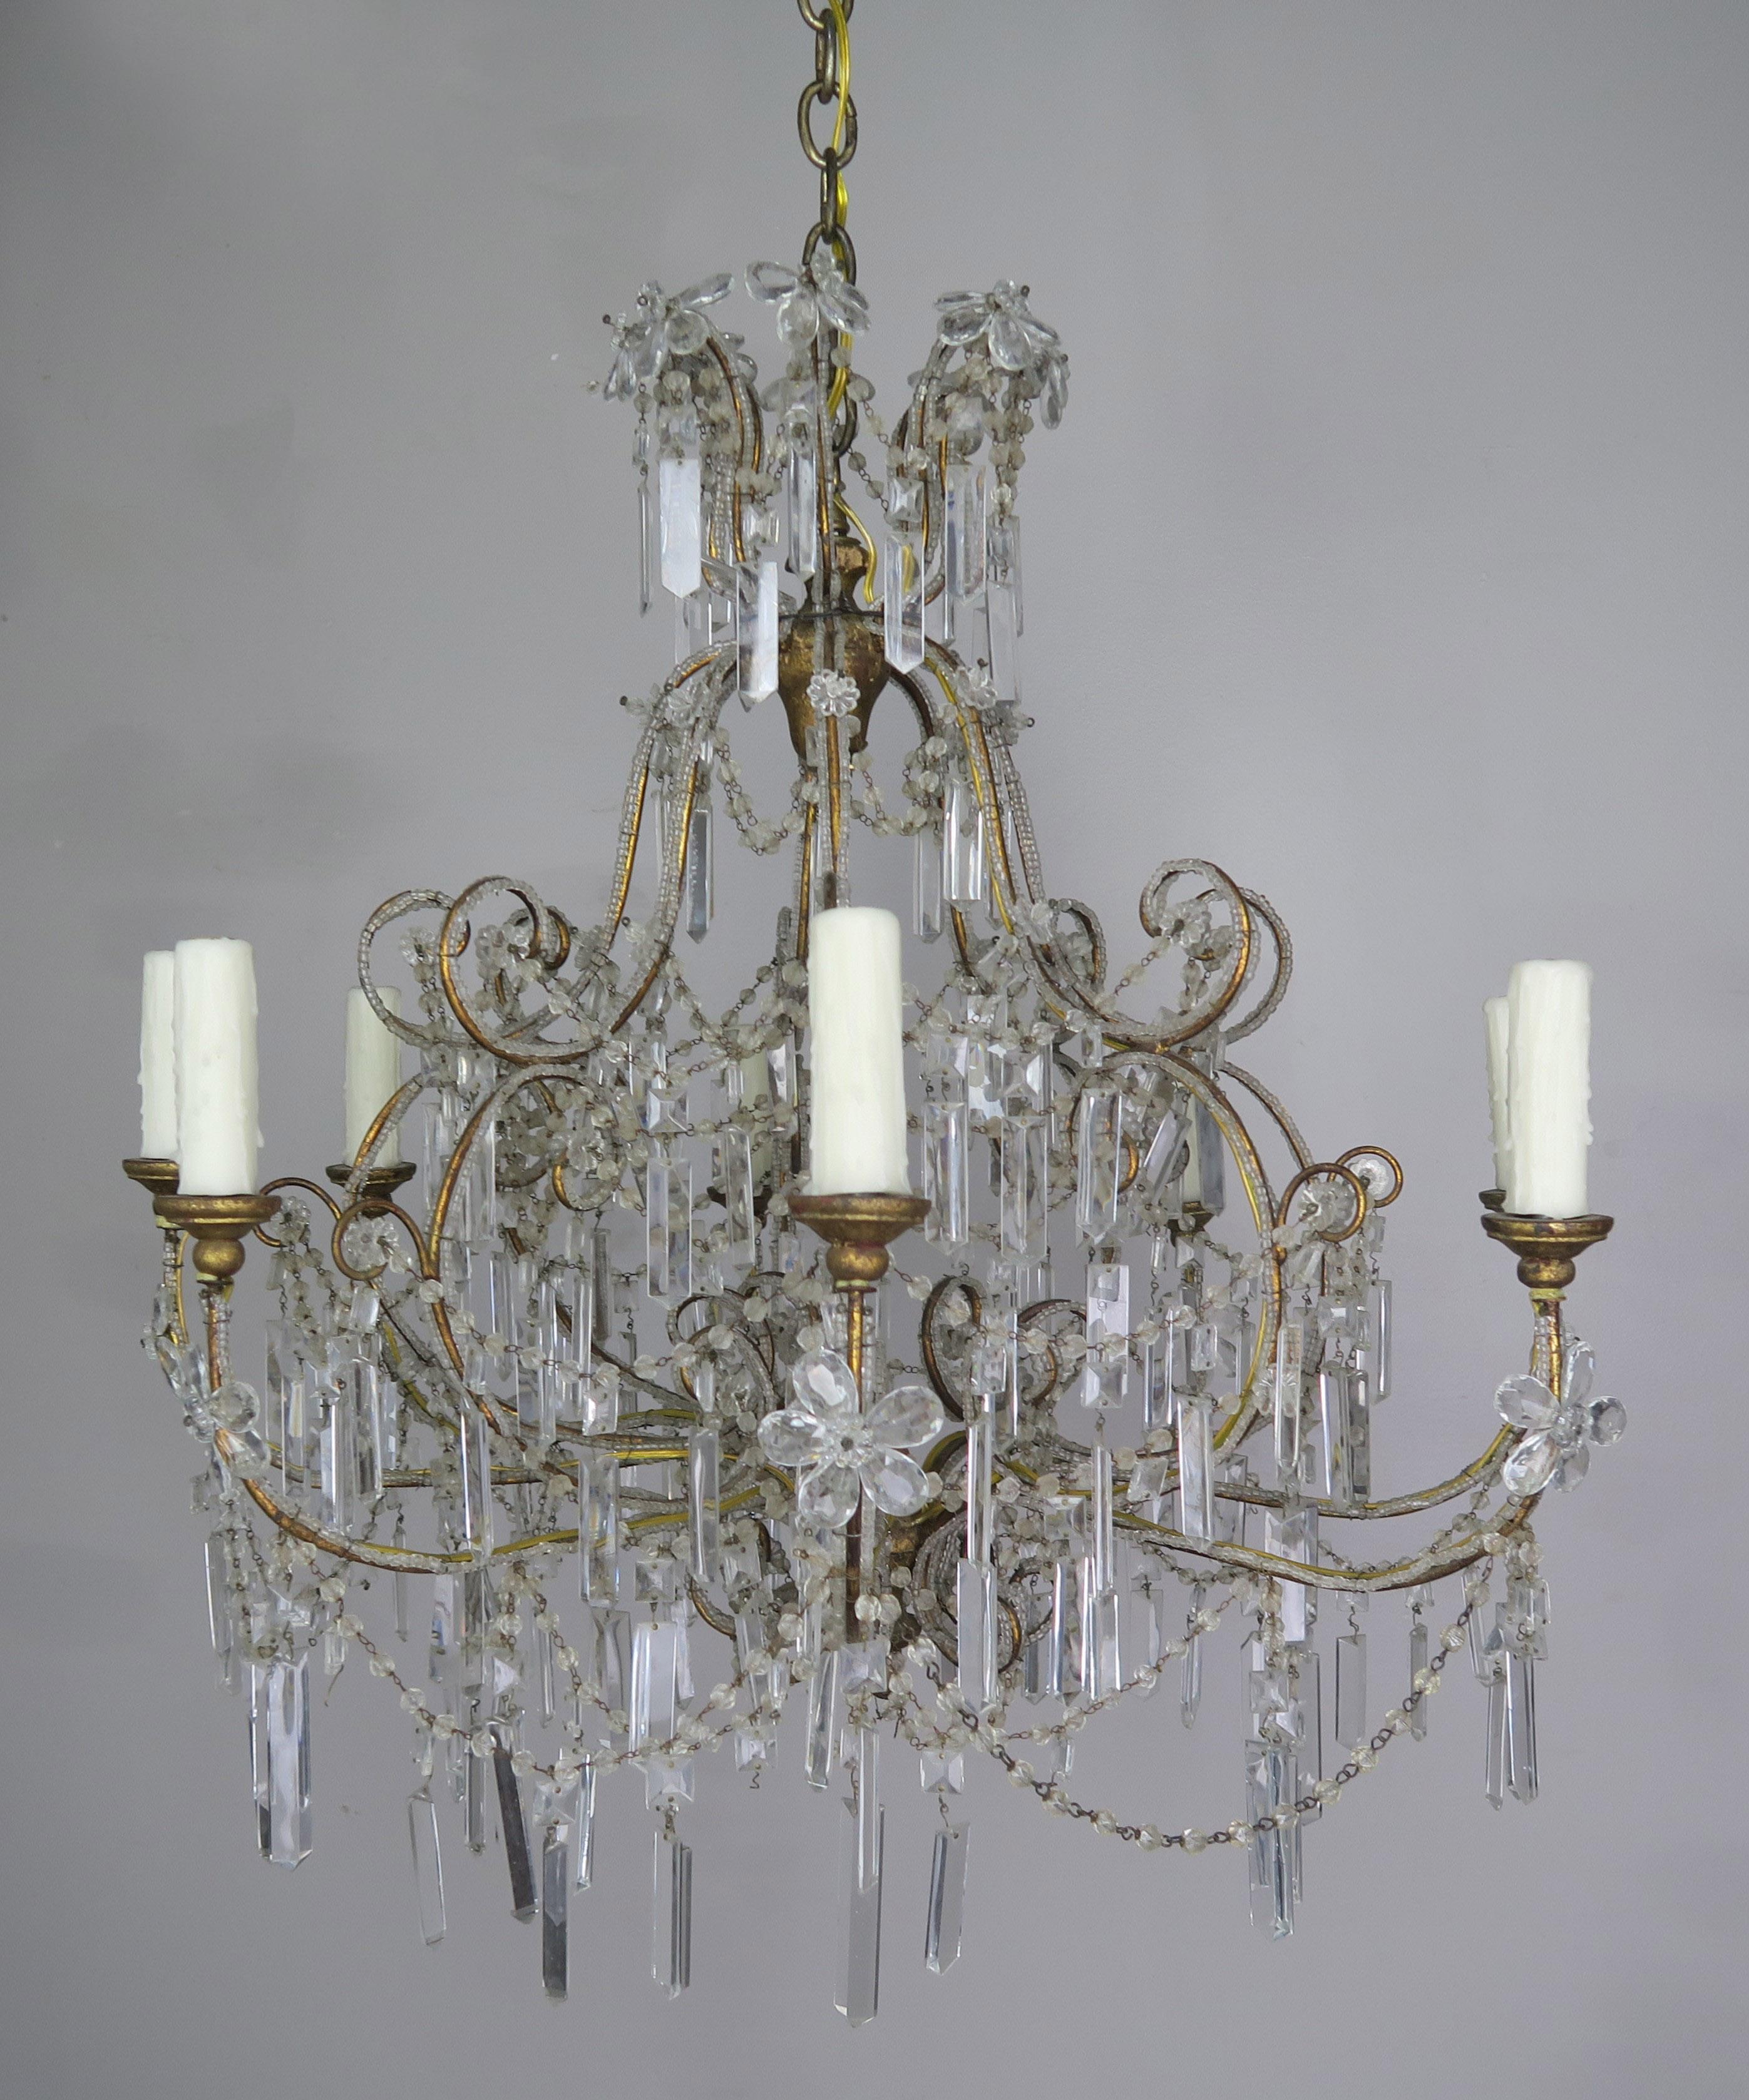 Eight light crystal beaded chandelier with handmade crystal flowers throughout. The fixture is adorned with garlands of English cut beads and sphere shaped crystals throughout. The fixture is newly rewired with cream colored drip wax candle covers.